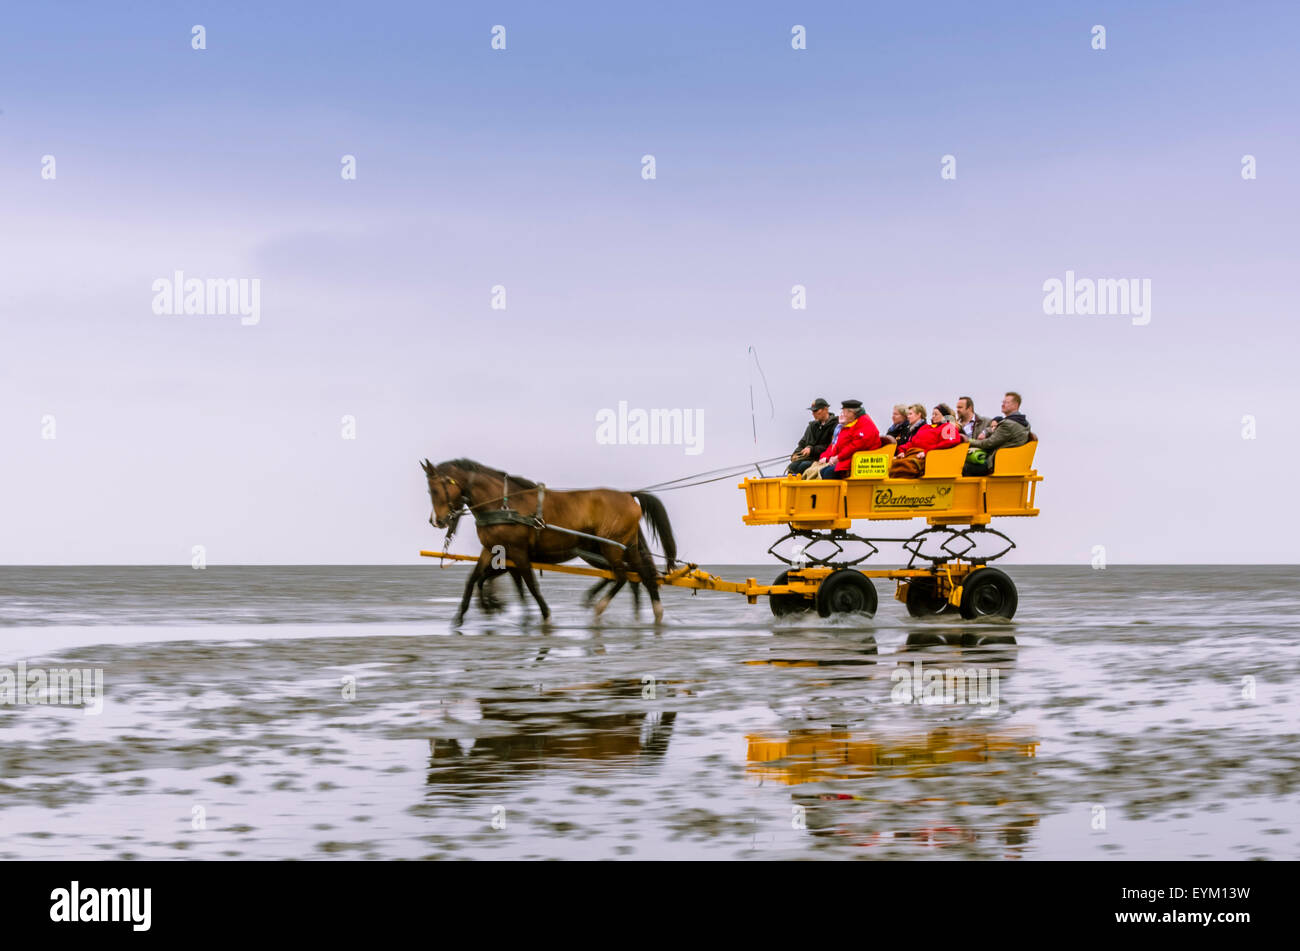 Germany, Lower Saxony, East Friesland, Cuxhaven, new plant, mud flats, wadden sea, carriage, Stock Photo